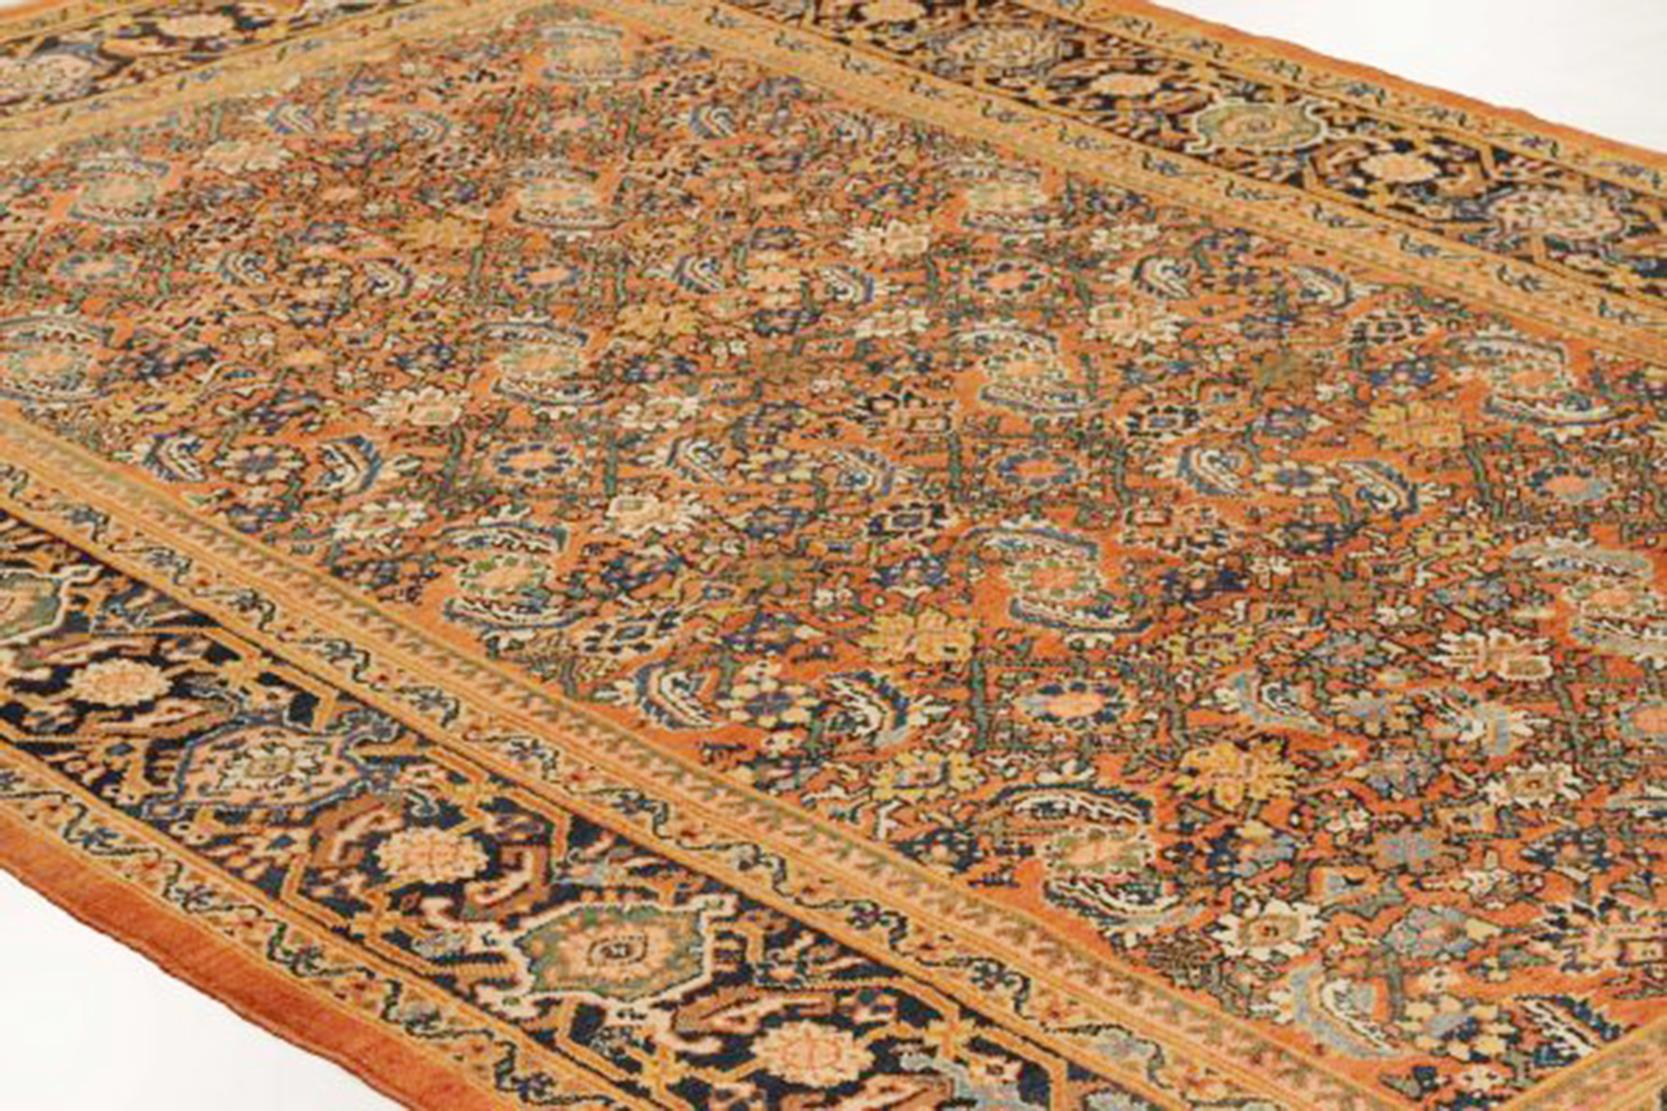 Hand-Woven Antique Persian Sultanabad Rug with Navy and Green Floral Motifs on Orange Field For Sale